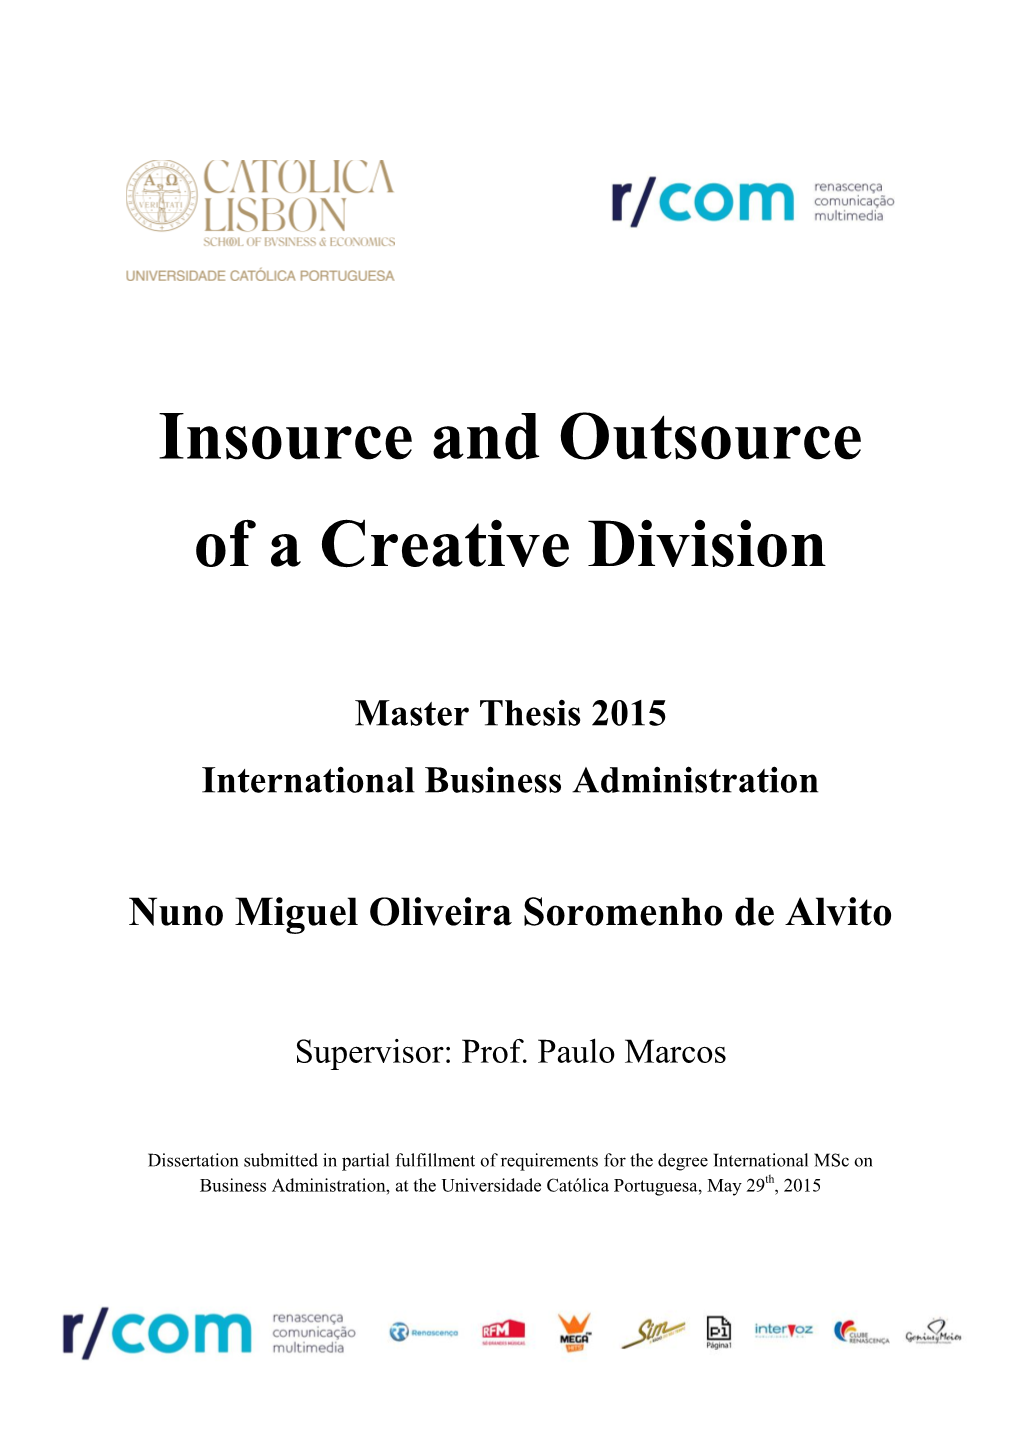 Insource and Outsource of a Creative Division